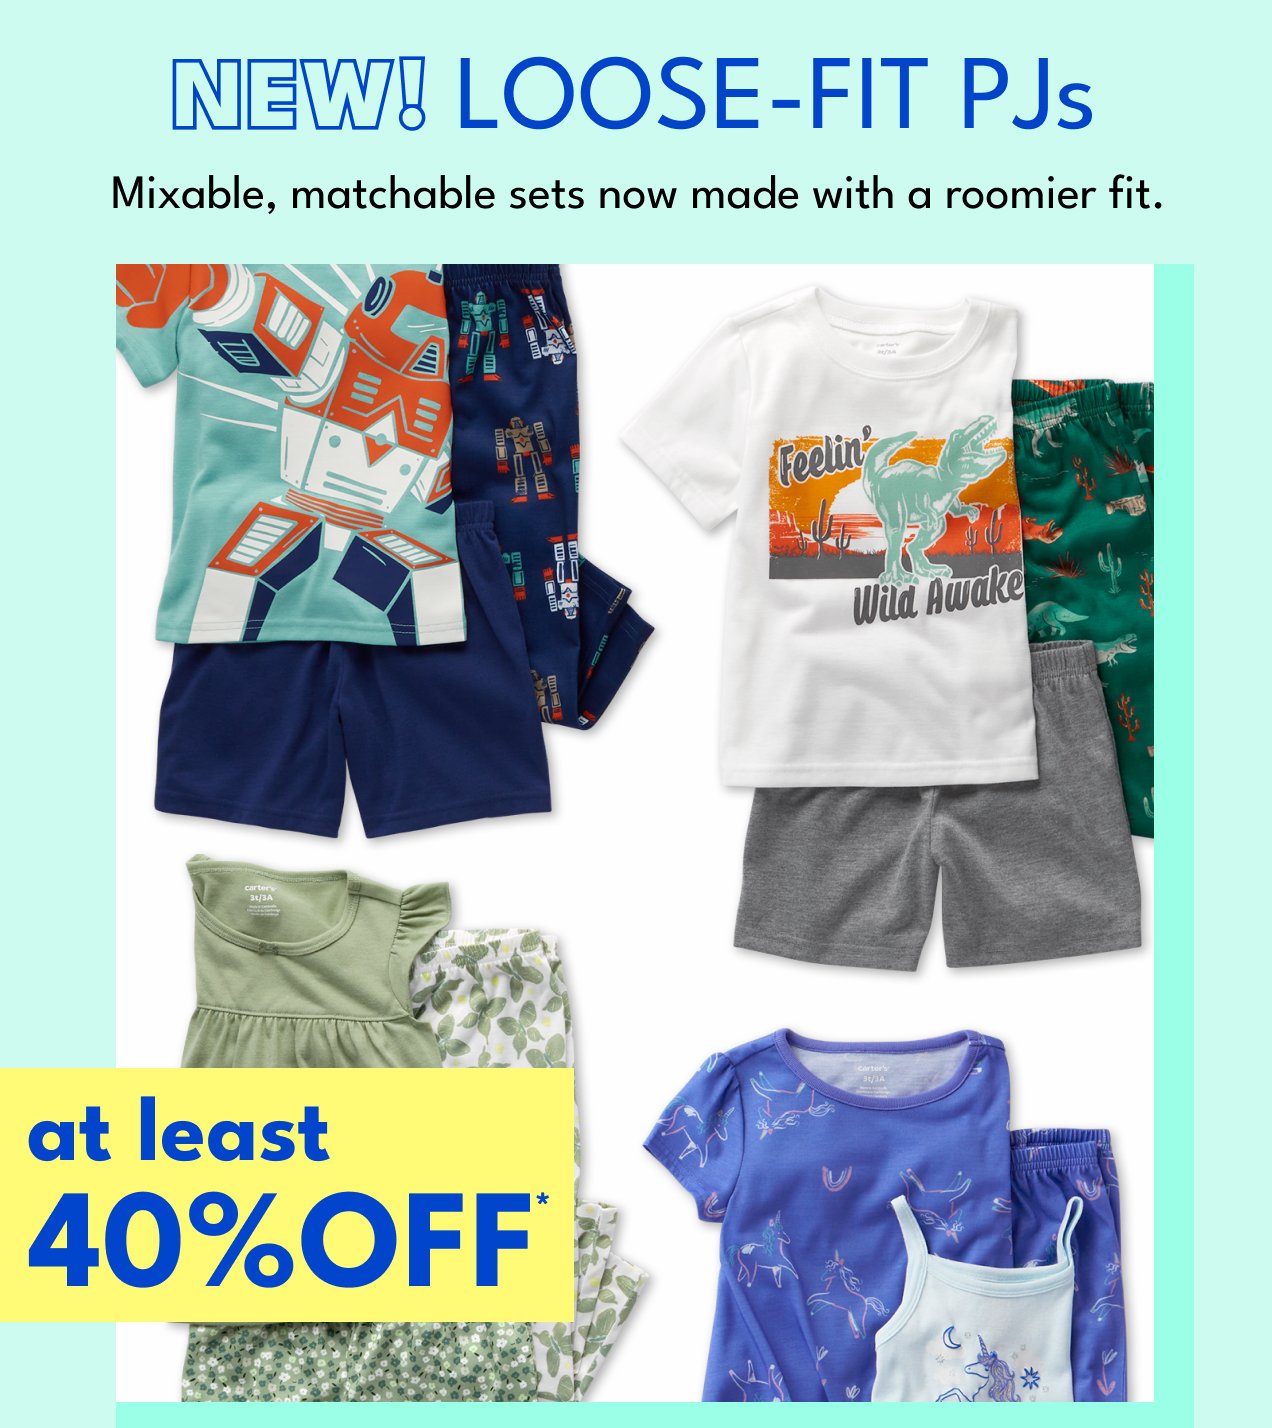 NEW! LOOSE-FIT PJs | Mixable, matchable sets now made with a roomier fit. | at least 40% OFF*